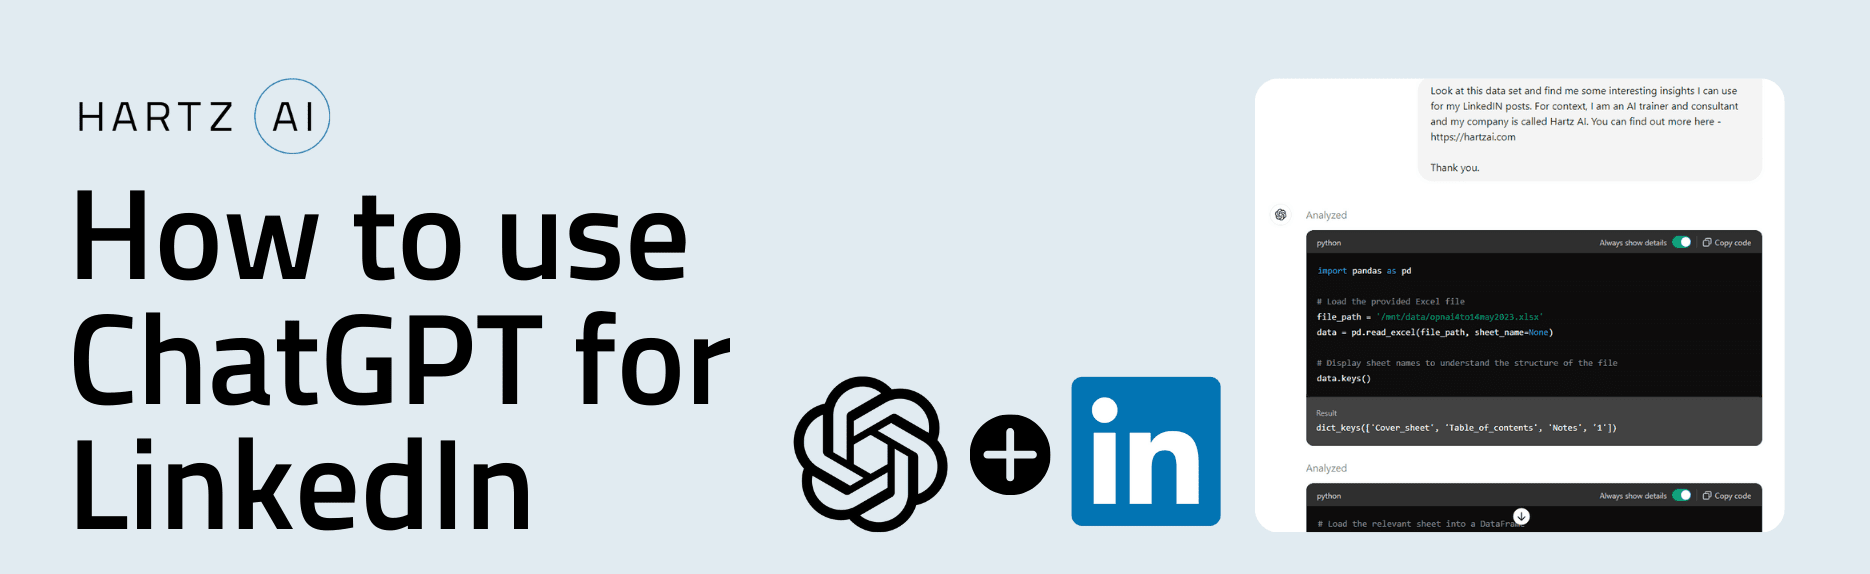 ChatGPT Course For LinkedIn